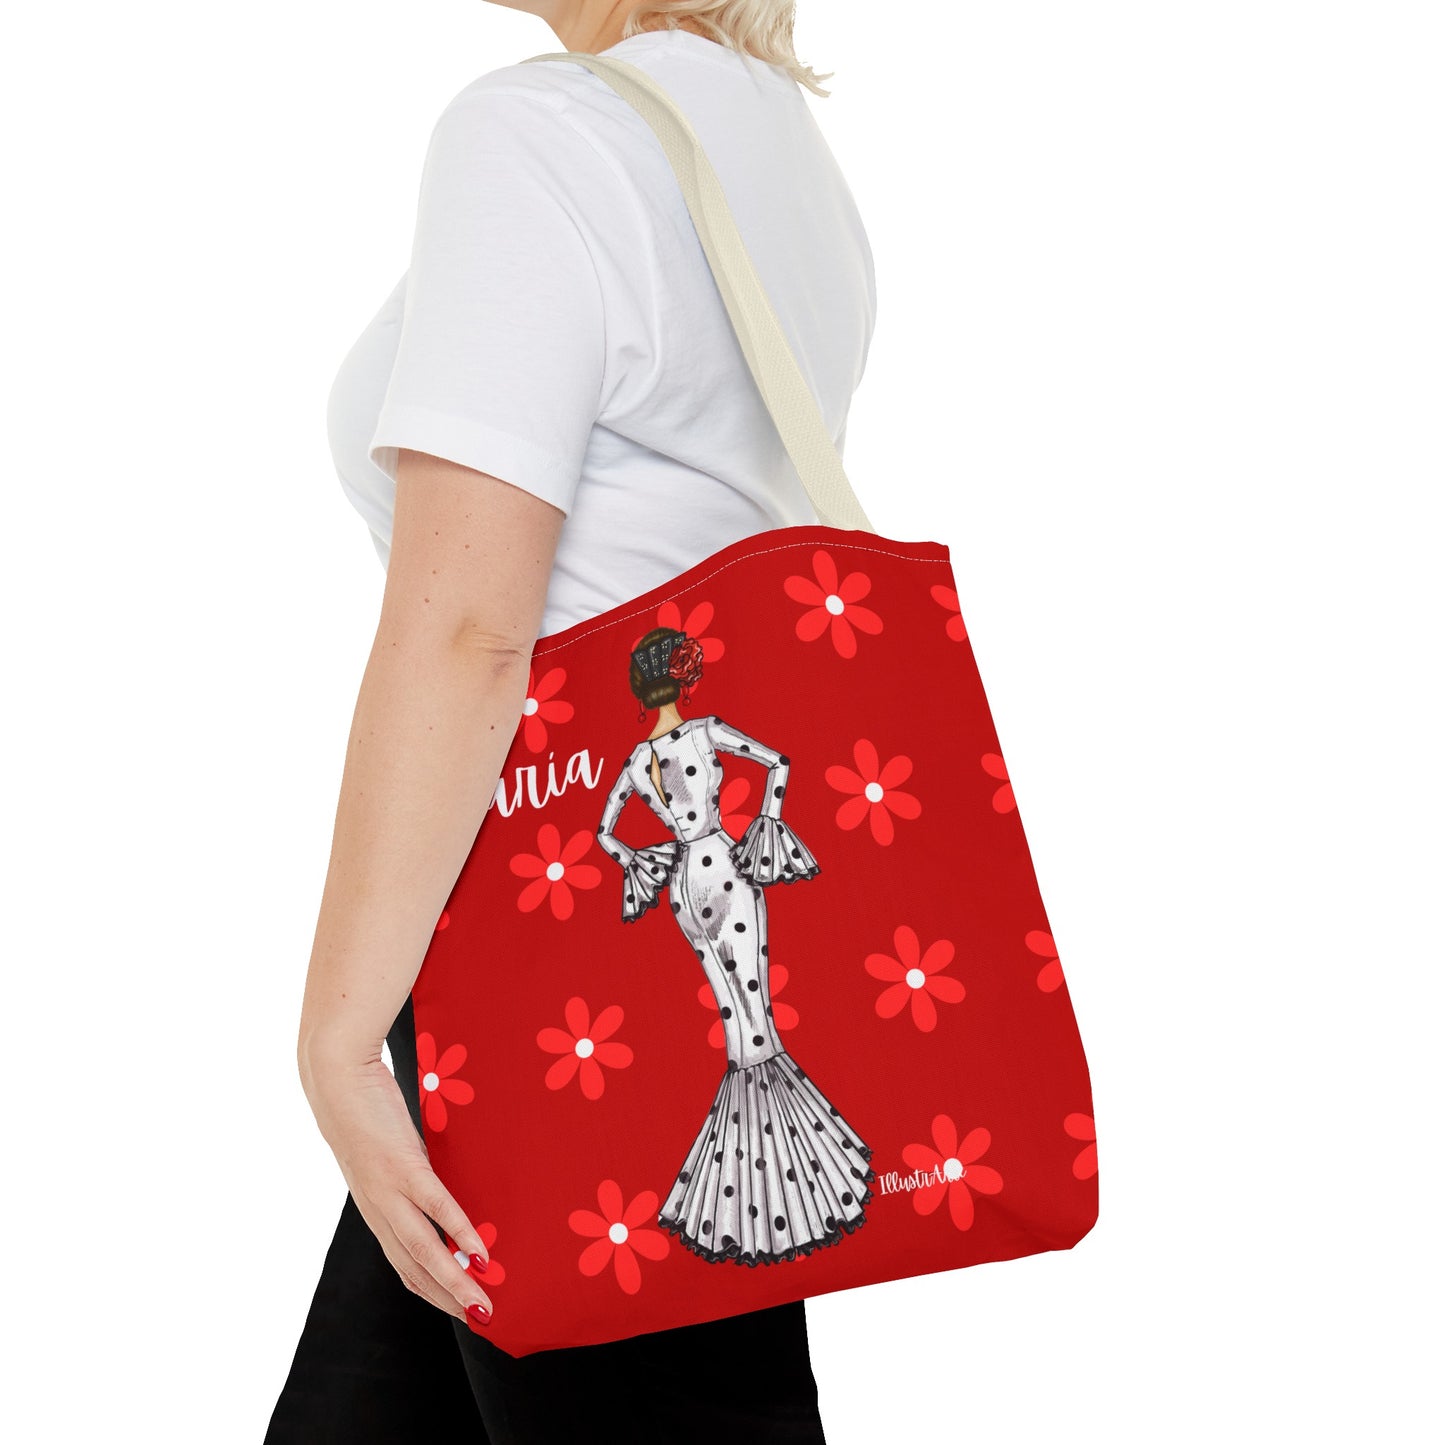 a woman carrying a red bag with a picture of a woman on it